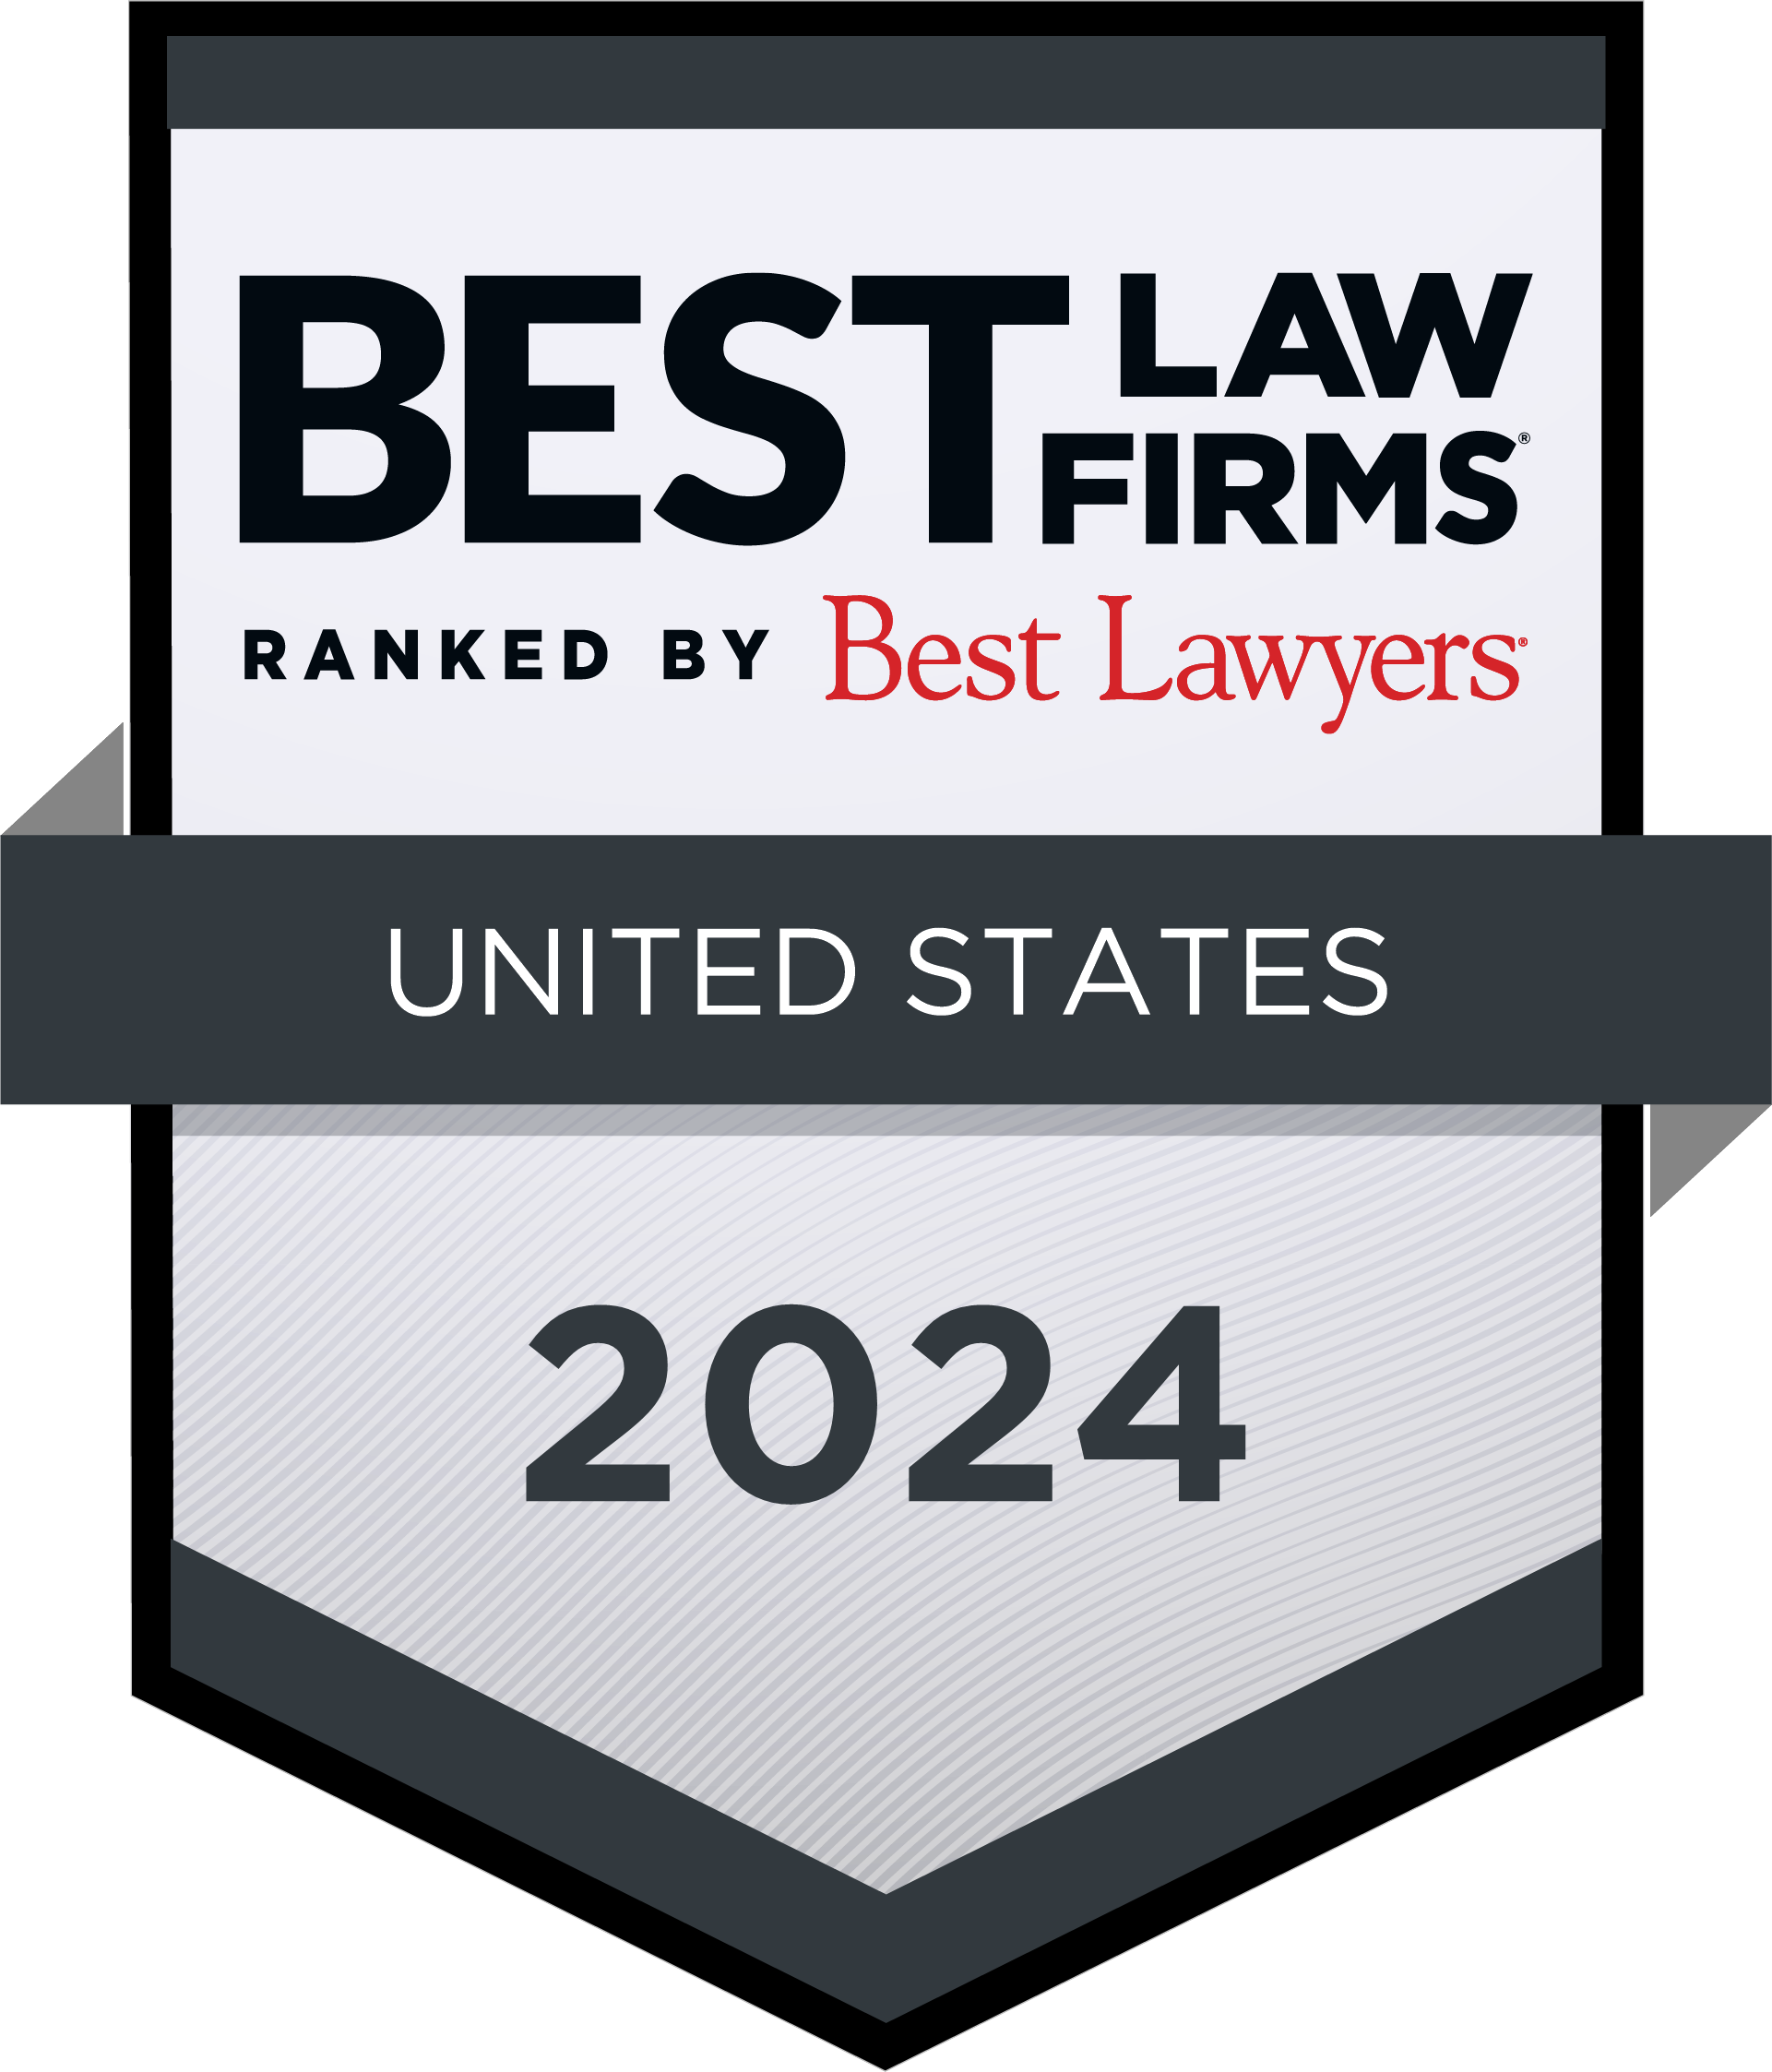 Lasher Holzapfel Sperry & Ebberson Attorneys Recognized in 2024 Edition of Best Law Firms®, ranked by Best Lawyers® and Lawyers Acknowledged as “Lawyer of the Year,” “Best Lawyers” and “Ones to Watch”